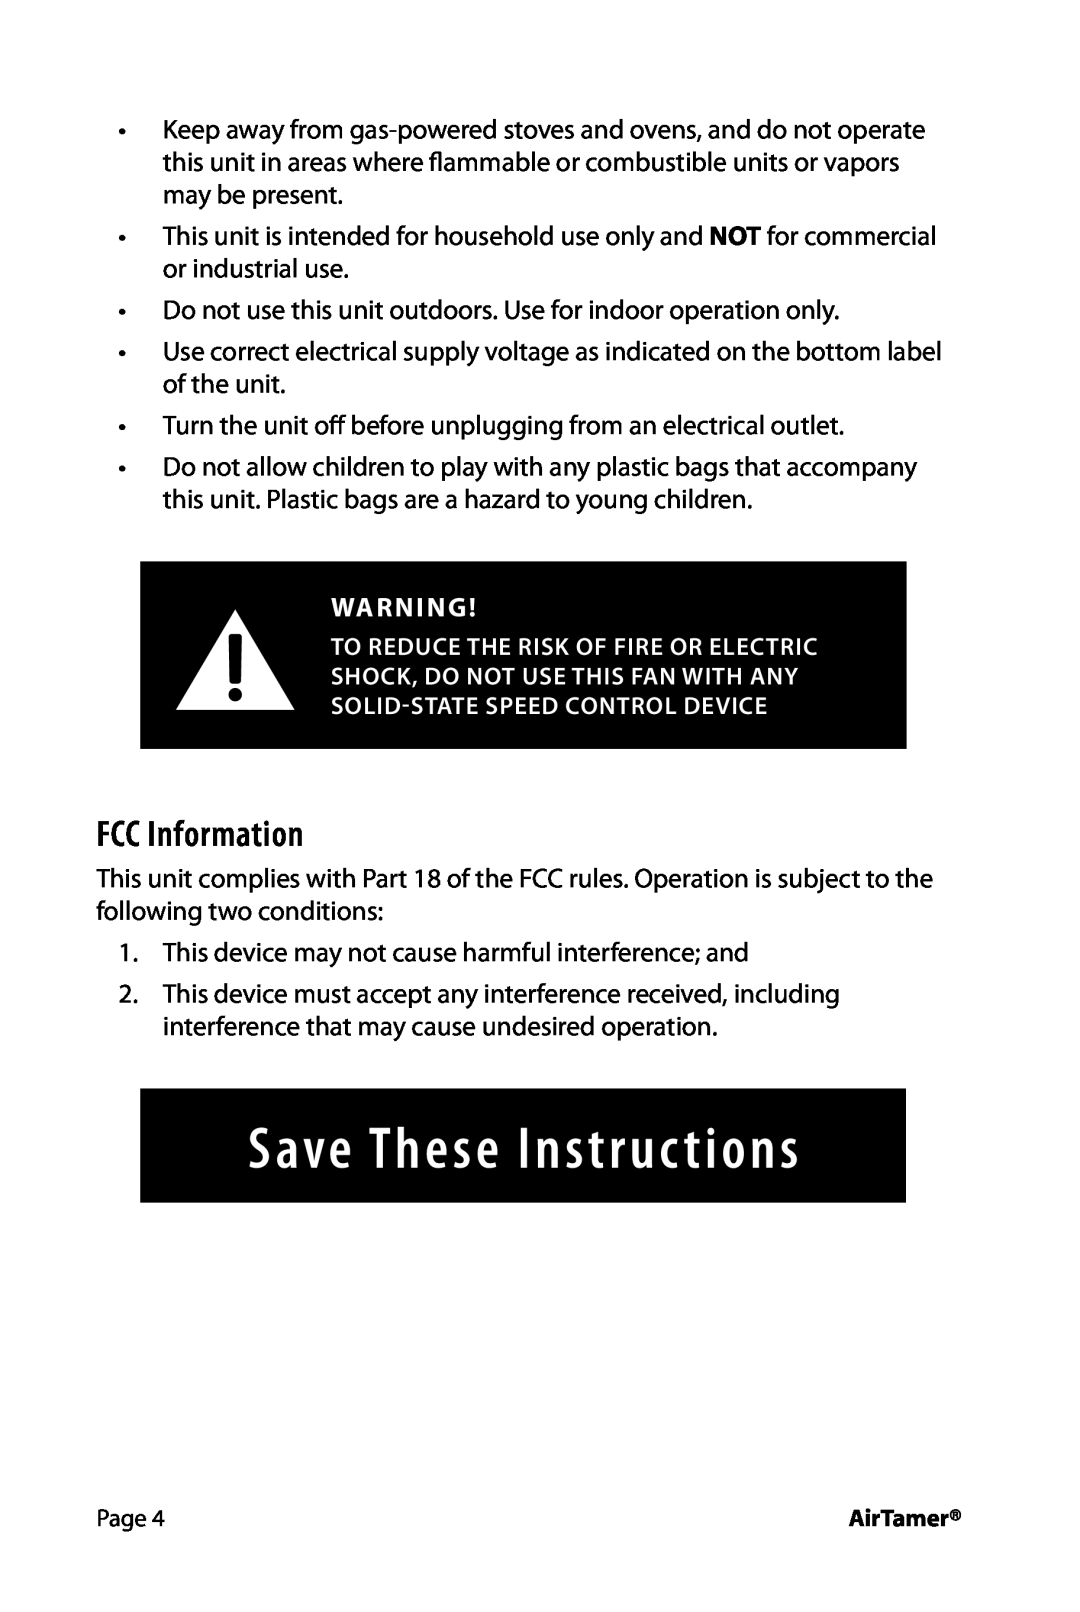 FilterStream A600 instruction manual FCC Information, Save These Instructions 